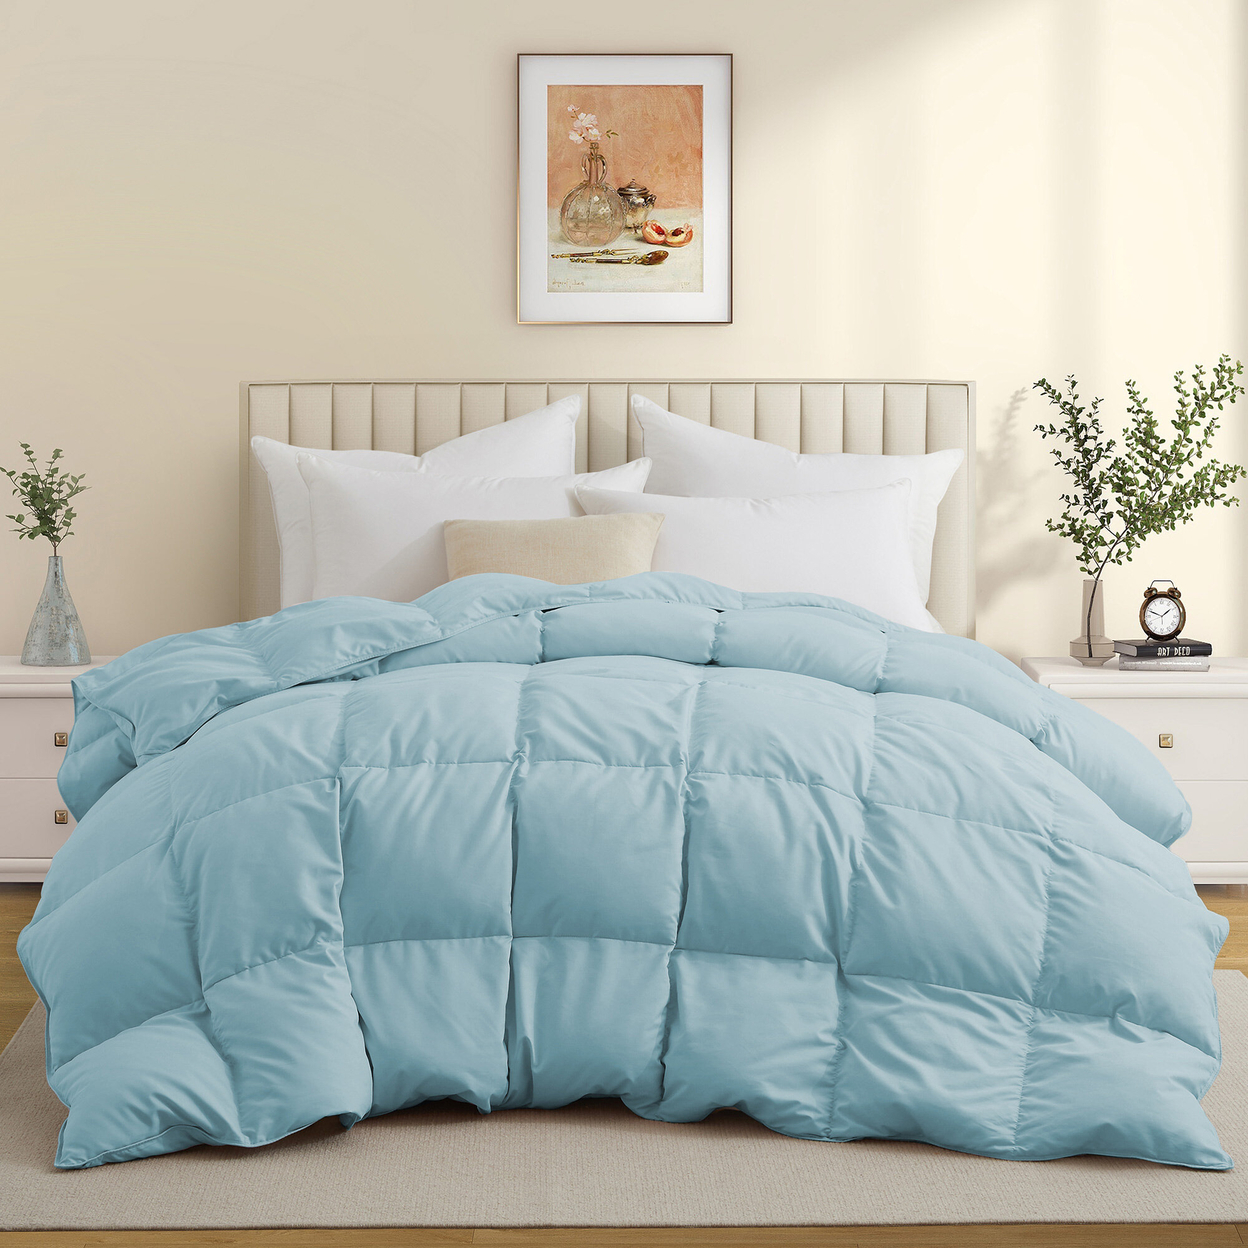 Premium All Seasons White Goose Feather Fiber And Down Comforter - Winter Sky, Cal King